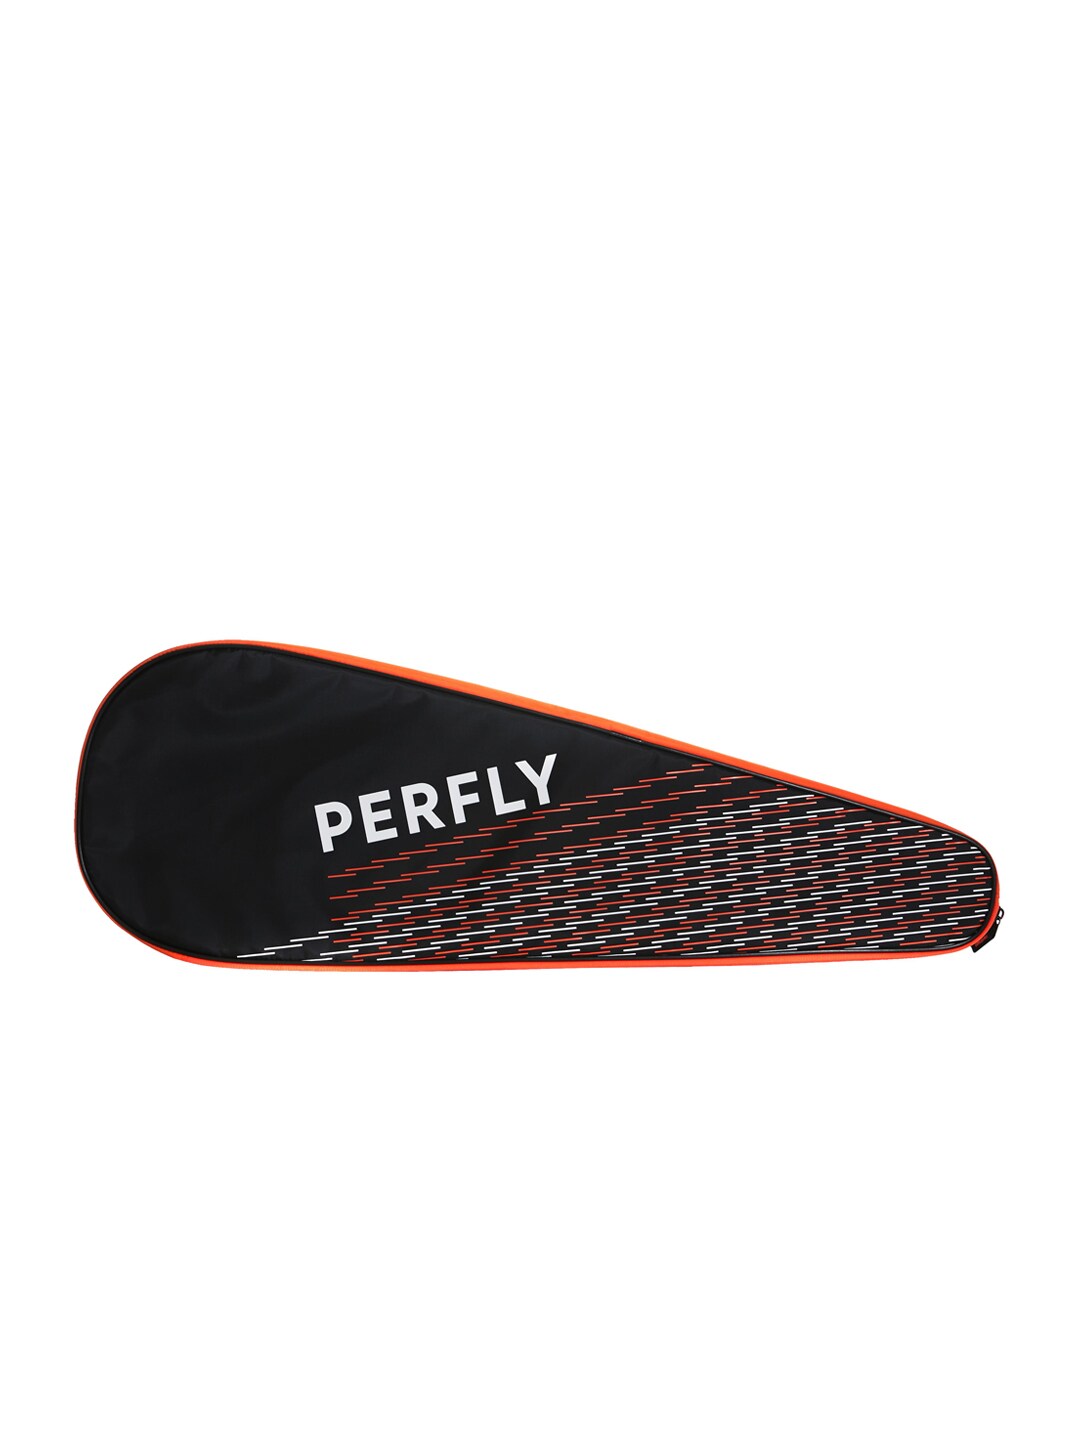 PERFLY By Decathlon Red & Black Printed 190 Eco Cover Badminton Bag Price in India